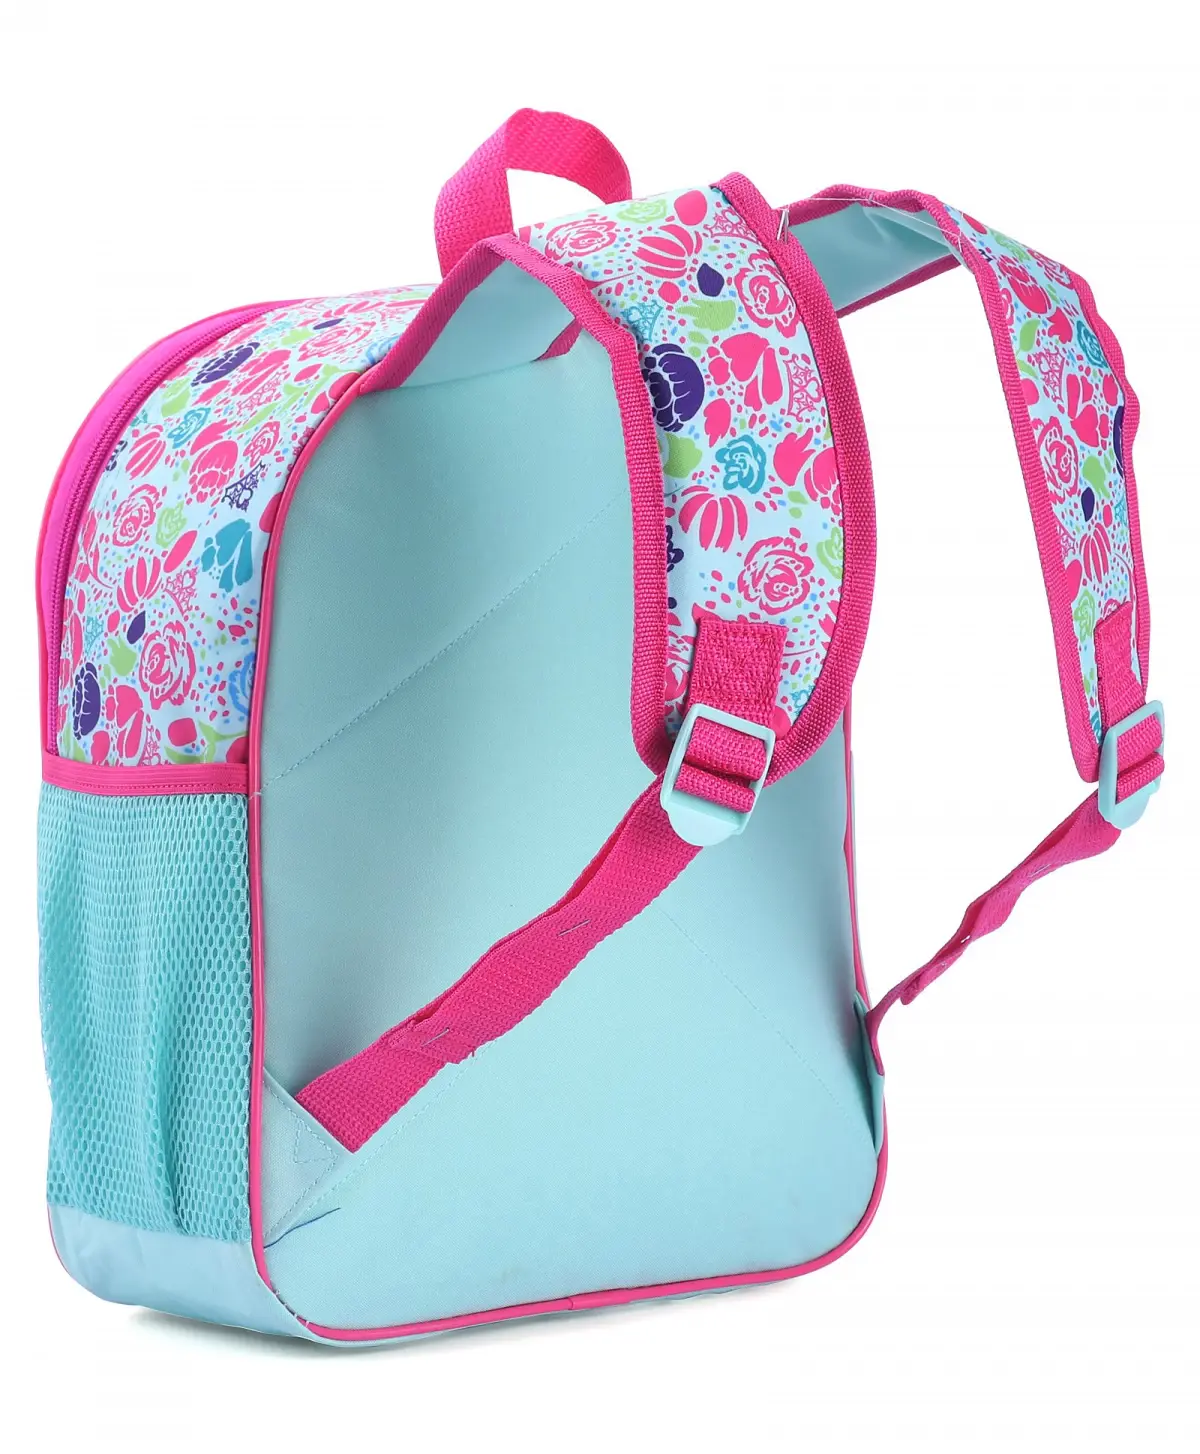 Striders 13 inches Princess School Bag Royal Elegance in Every Step for Little Royalty Multicolor For Kids Ages 2Y+